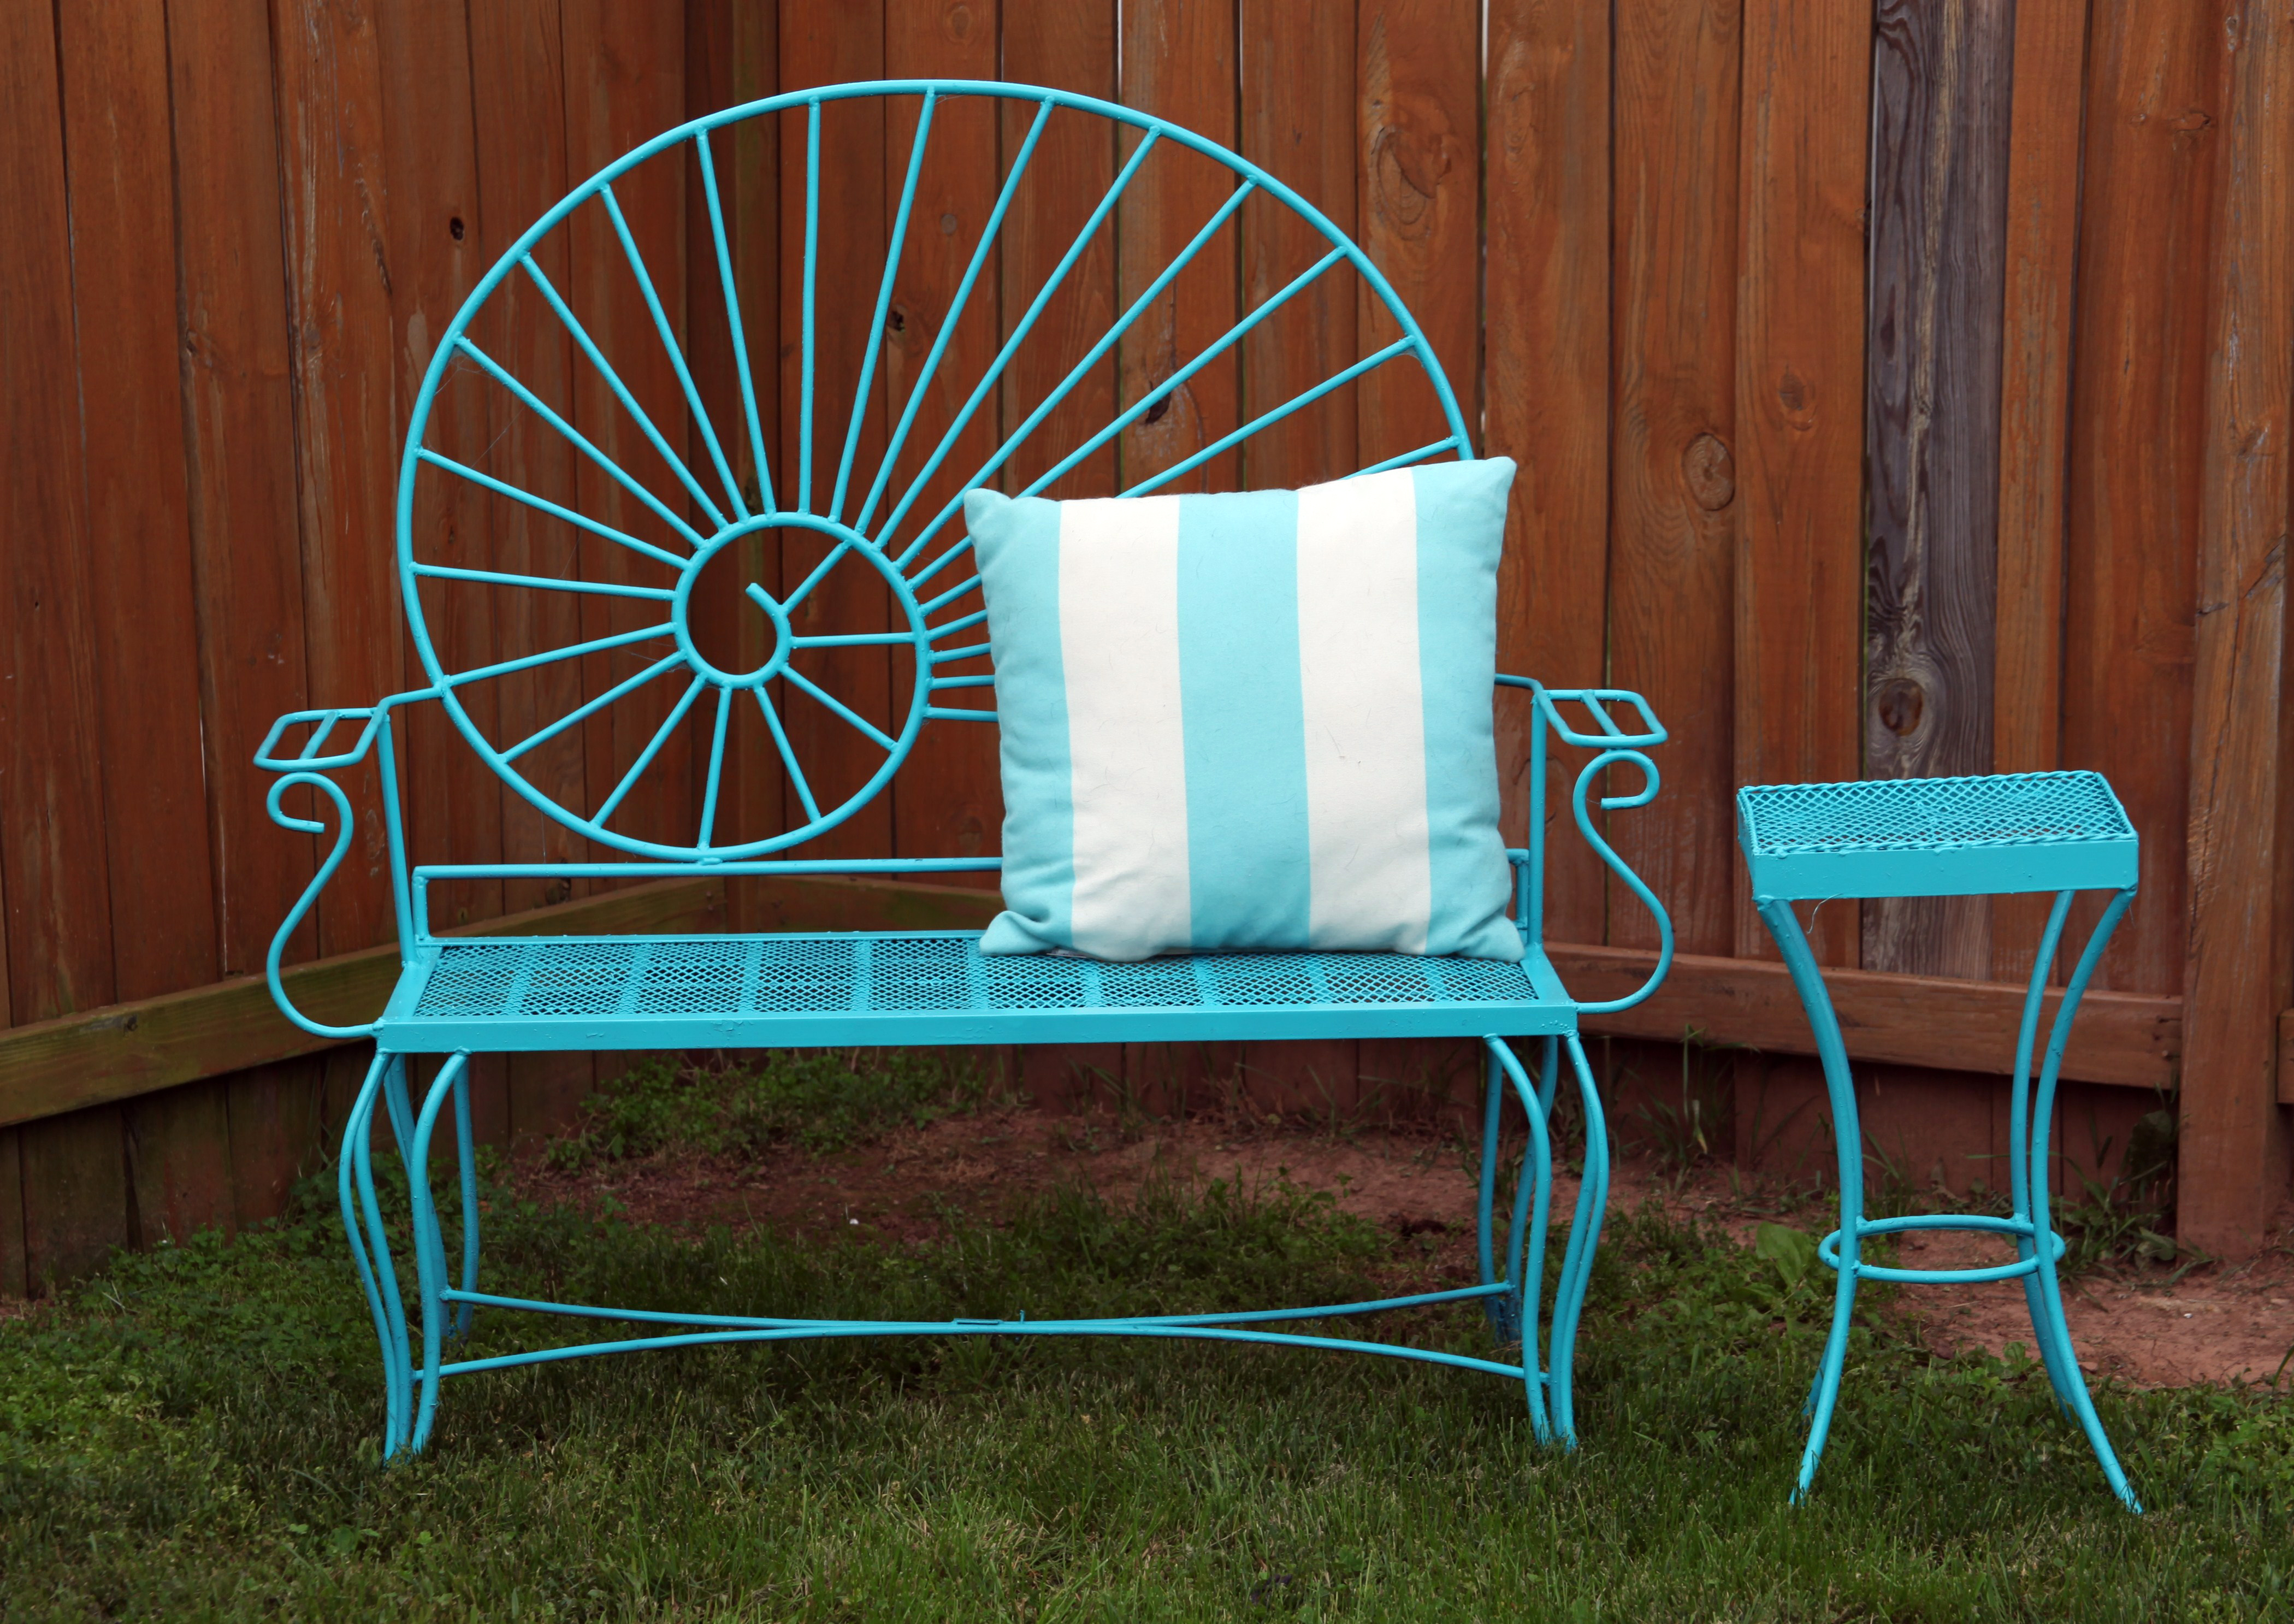 More Fun with Spray Paint–A Little Rust oleum Changes Everything